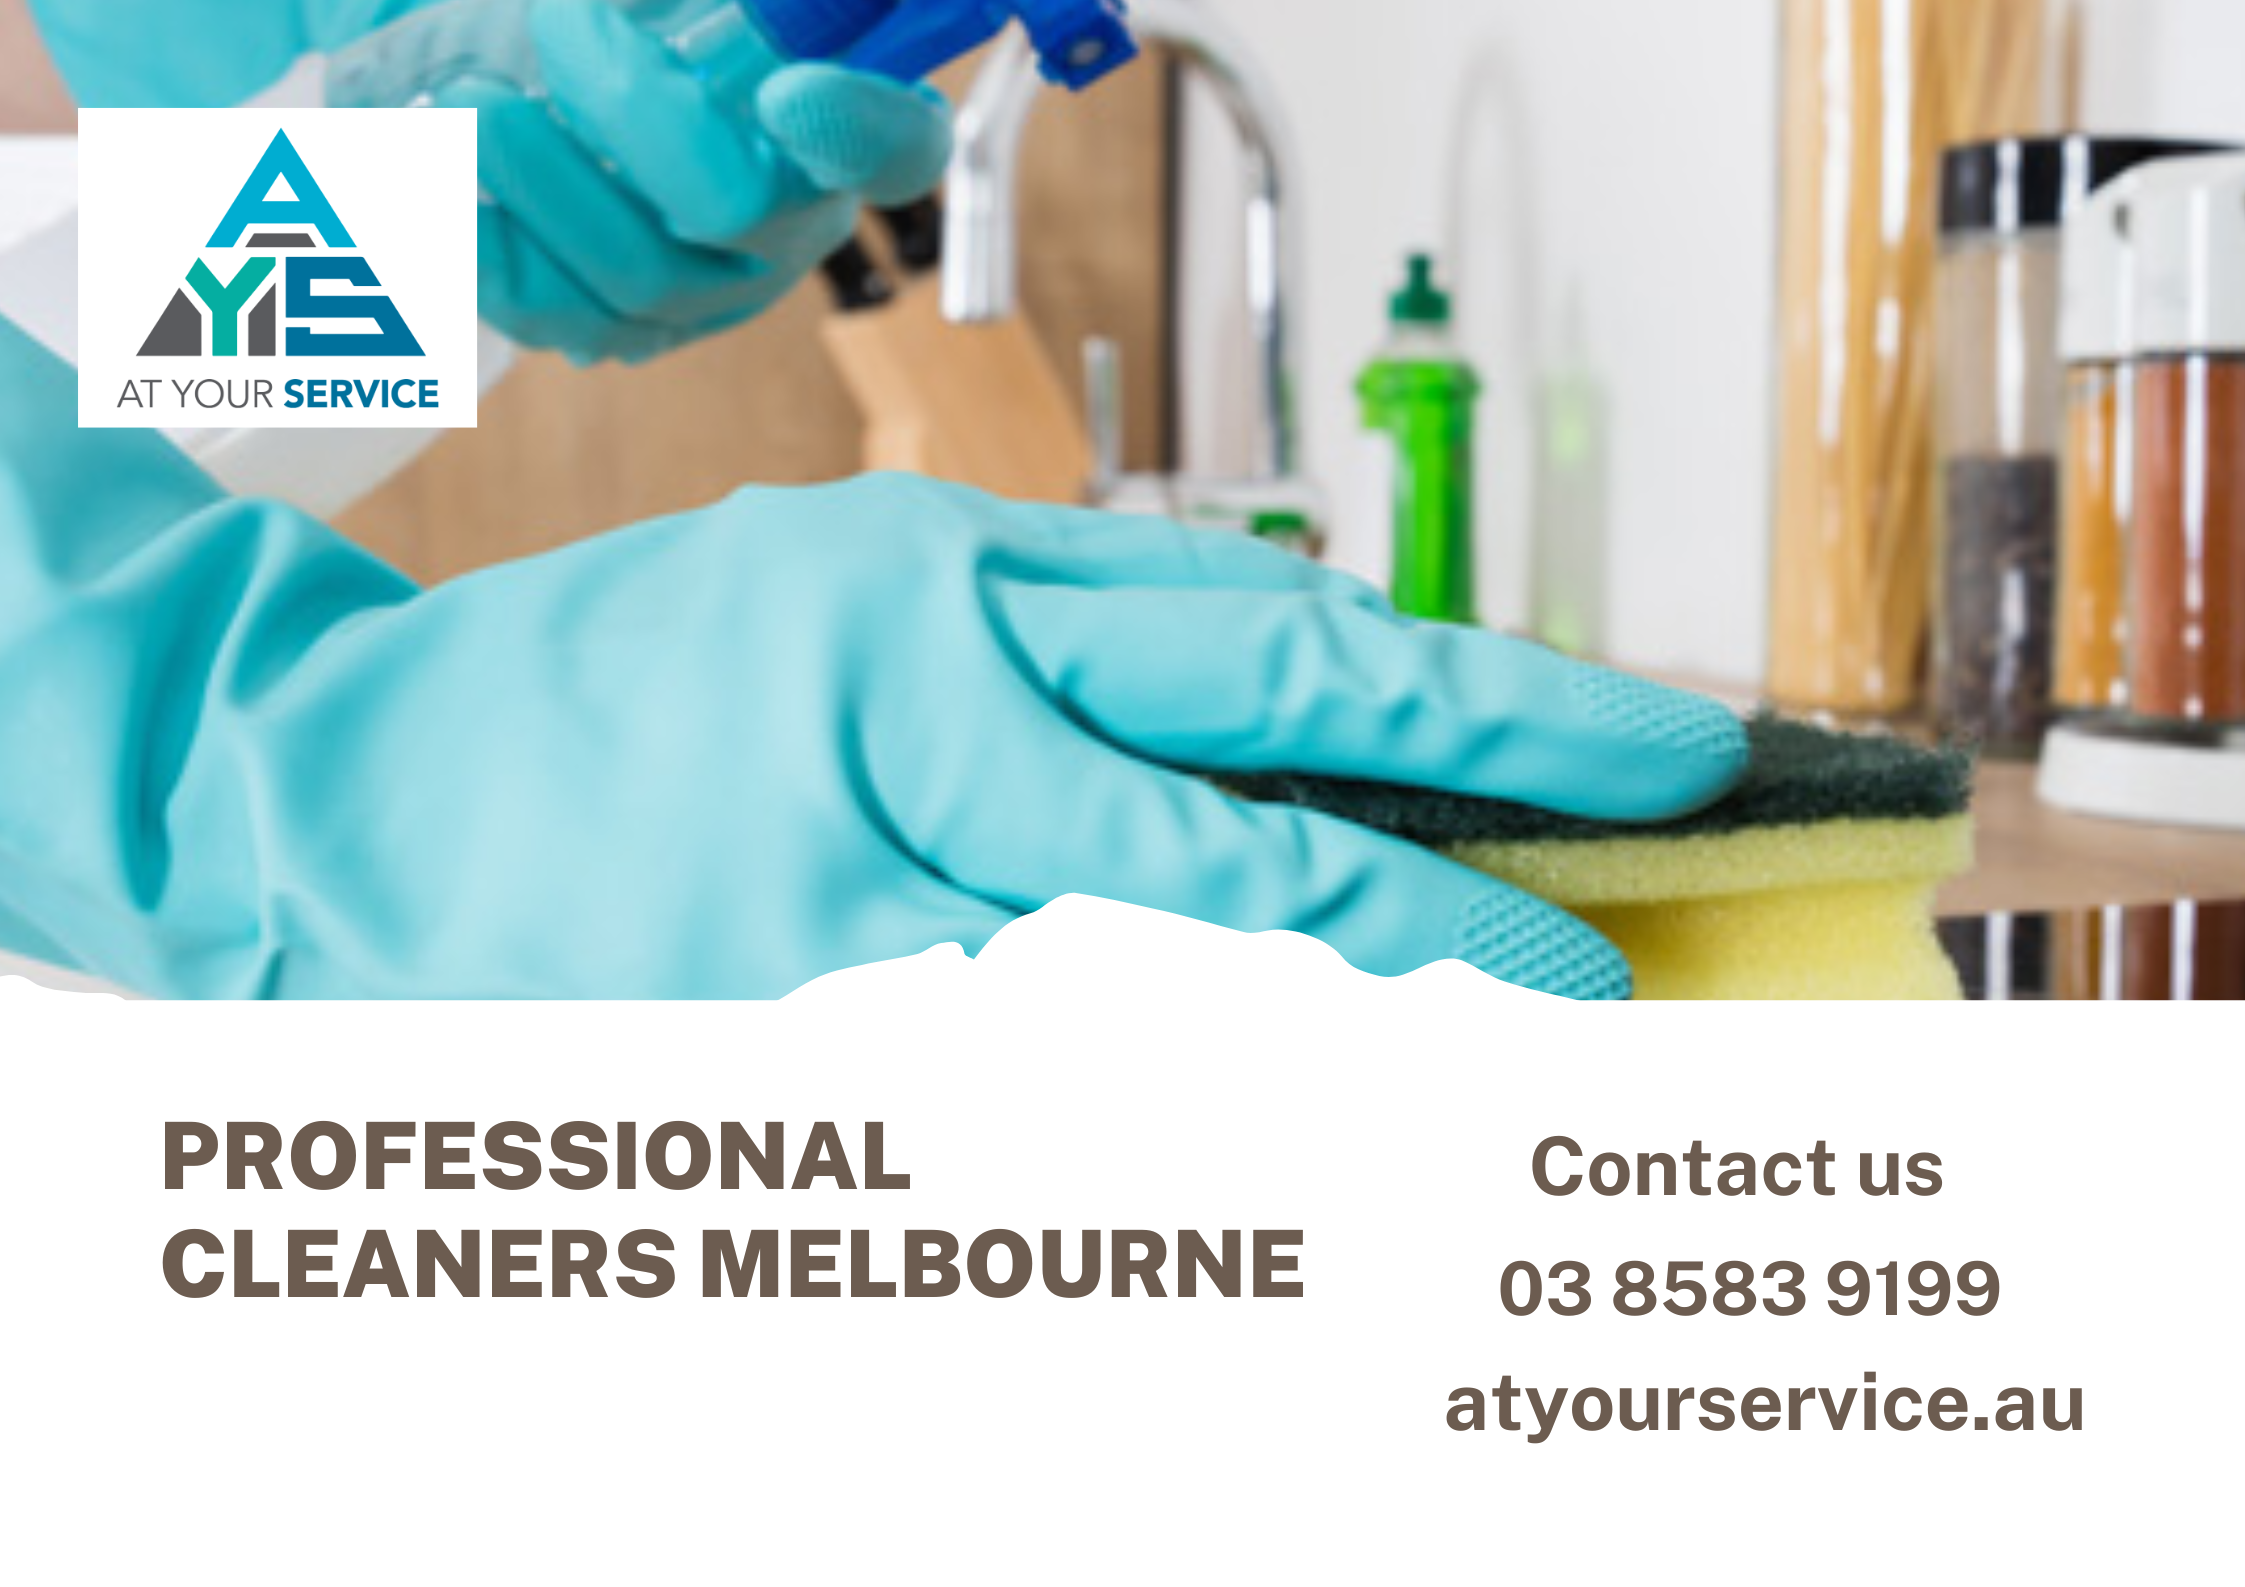 Safest Professional Cleaners in Melbourne You Can Trust